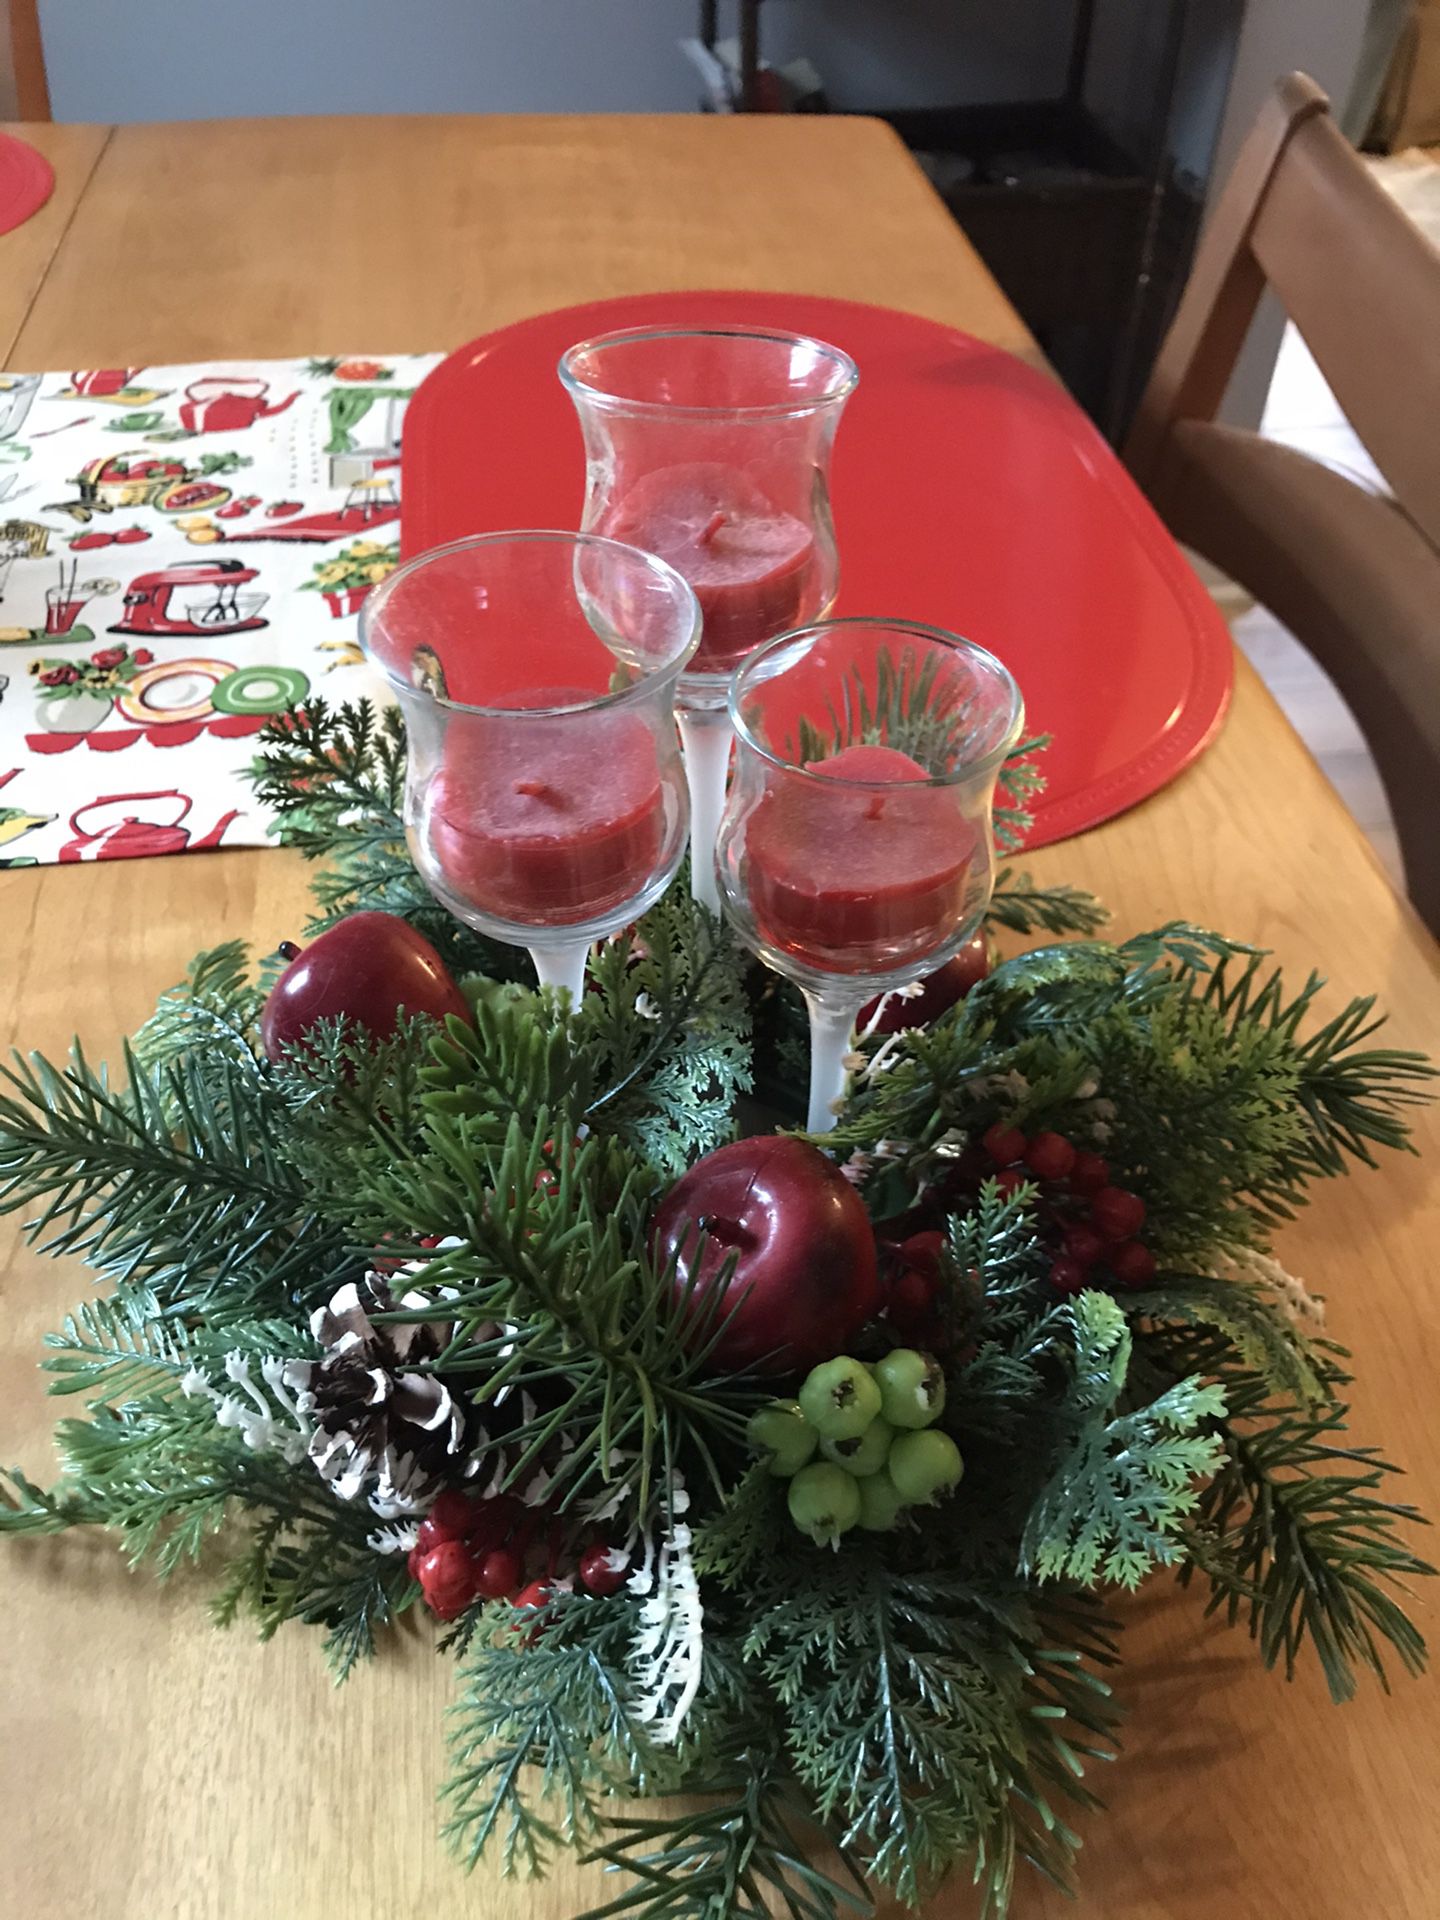 PartyLite Crystal Trio with added wreath. Pickup in Johnstown Ohio